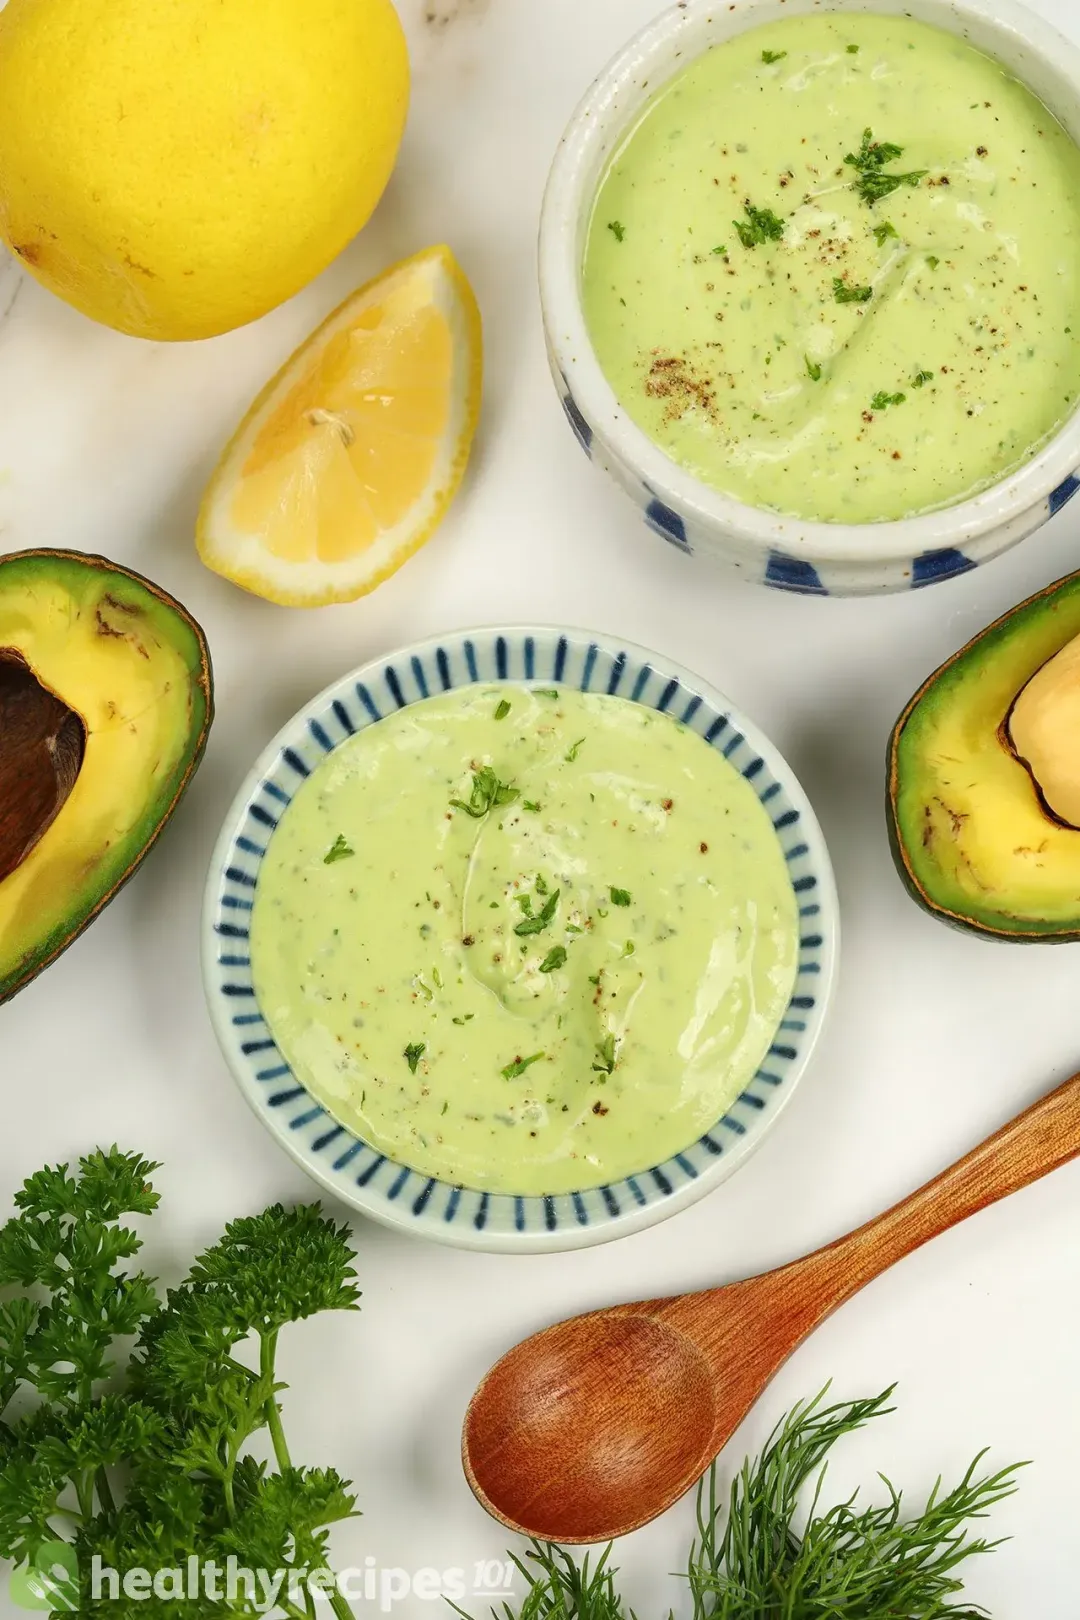 What Can I Do With Avocado Ranch Dressing